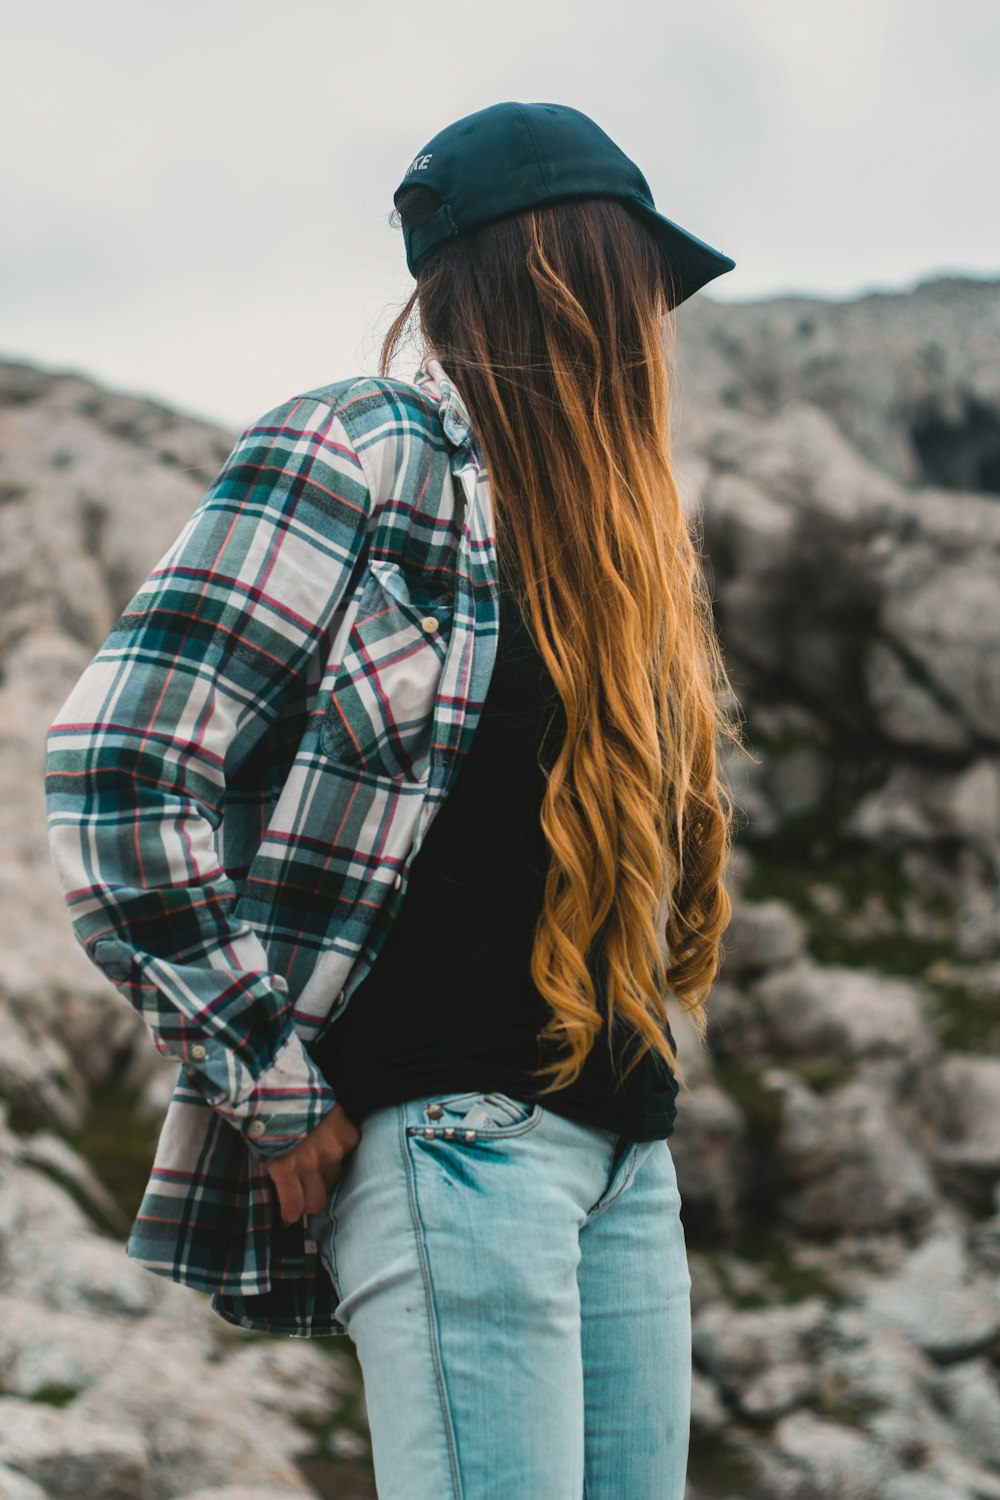 1K+ Woman In Cap Pictures | Download Free Images on Unsplash